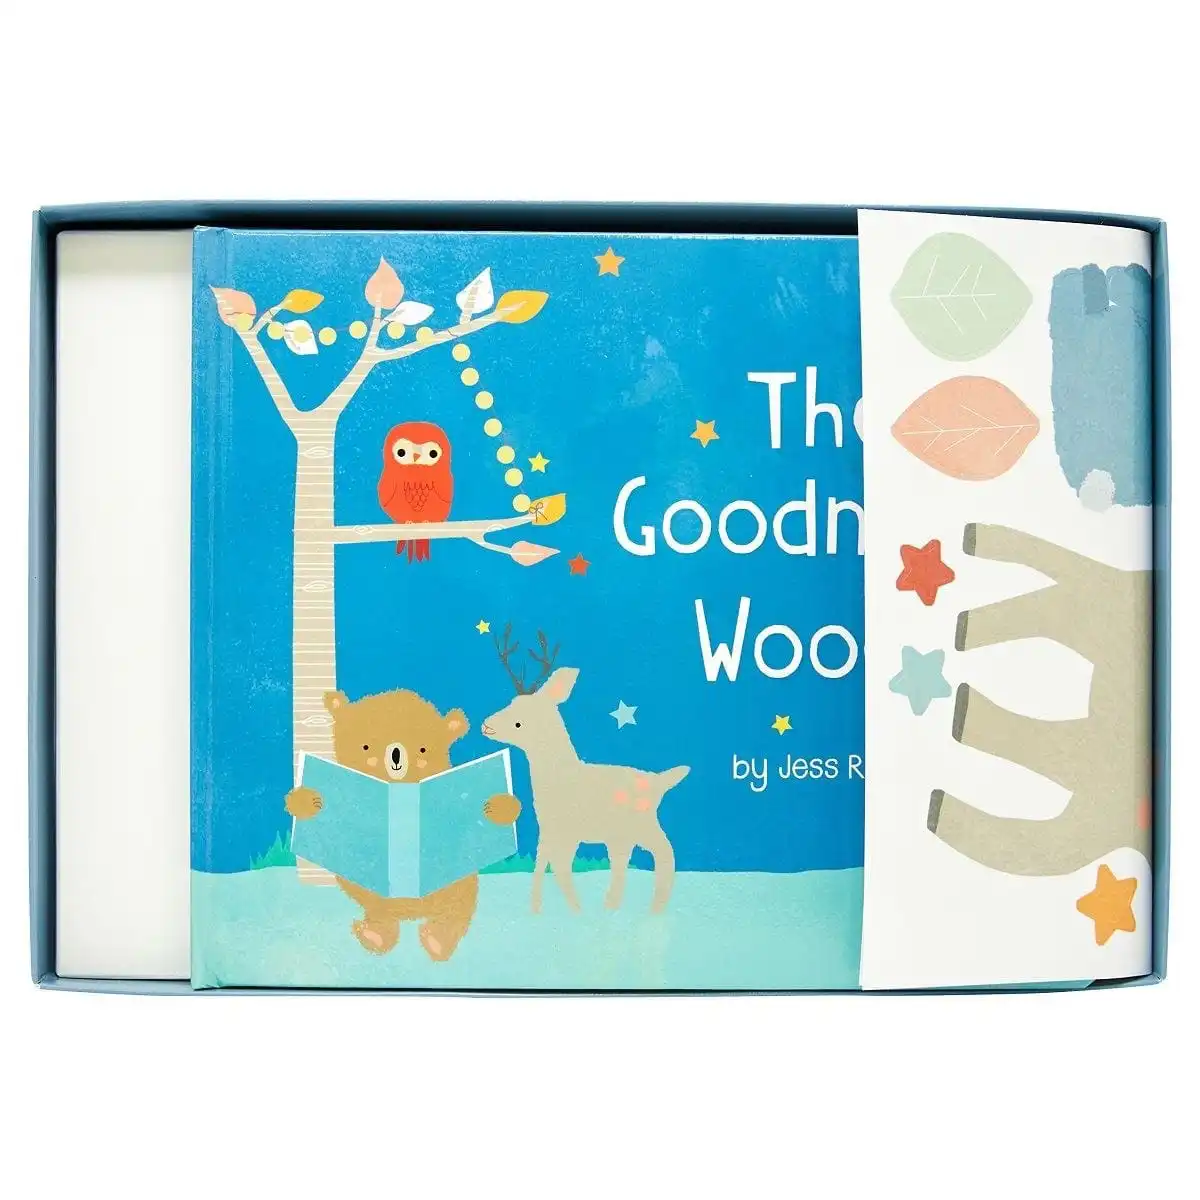 The Goodnight Woods - Book And Decal Set